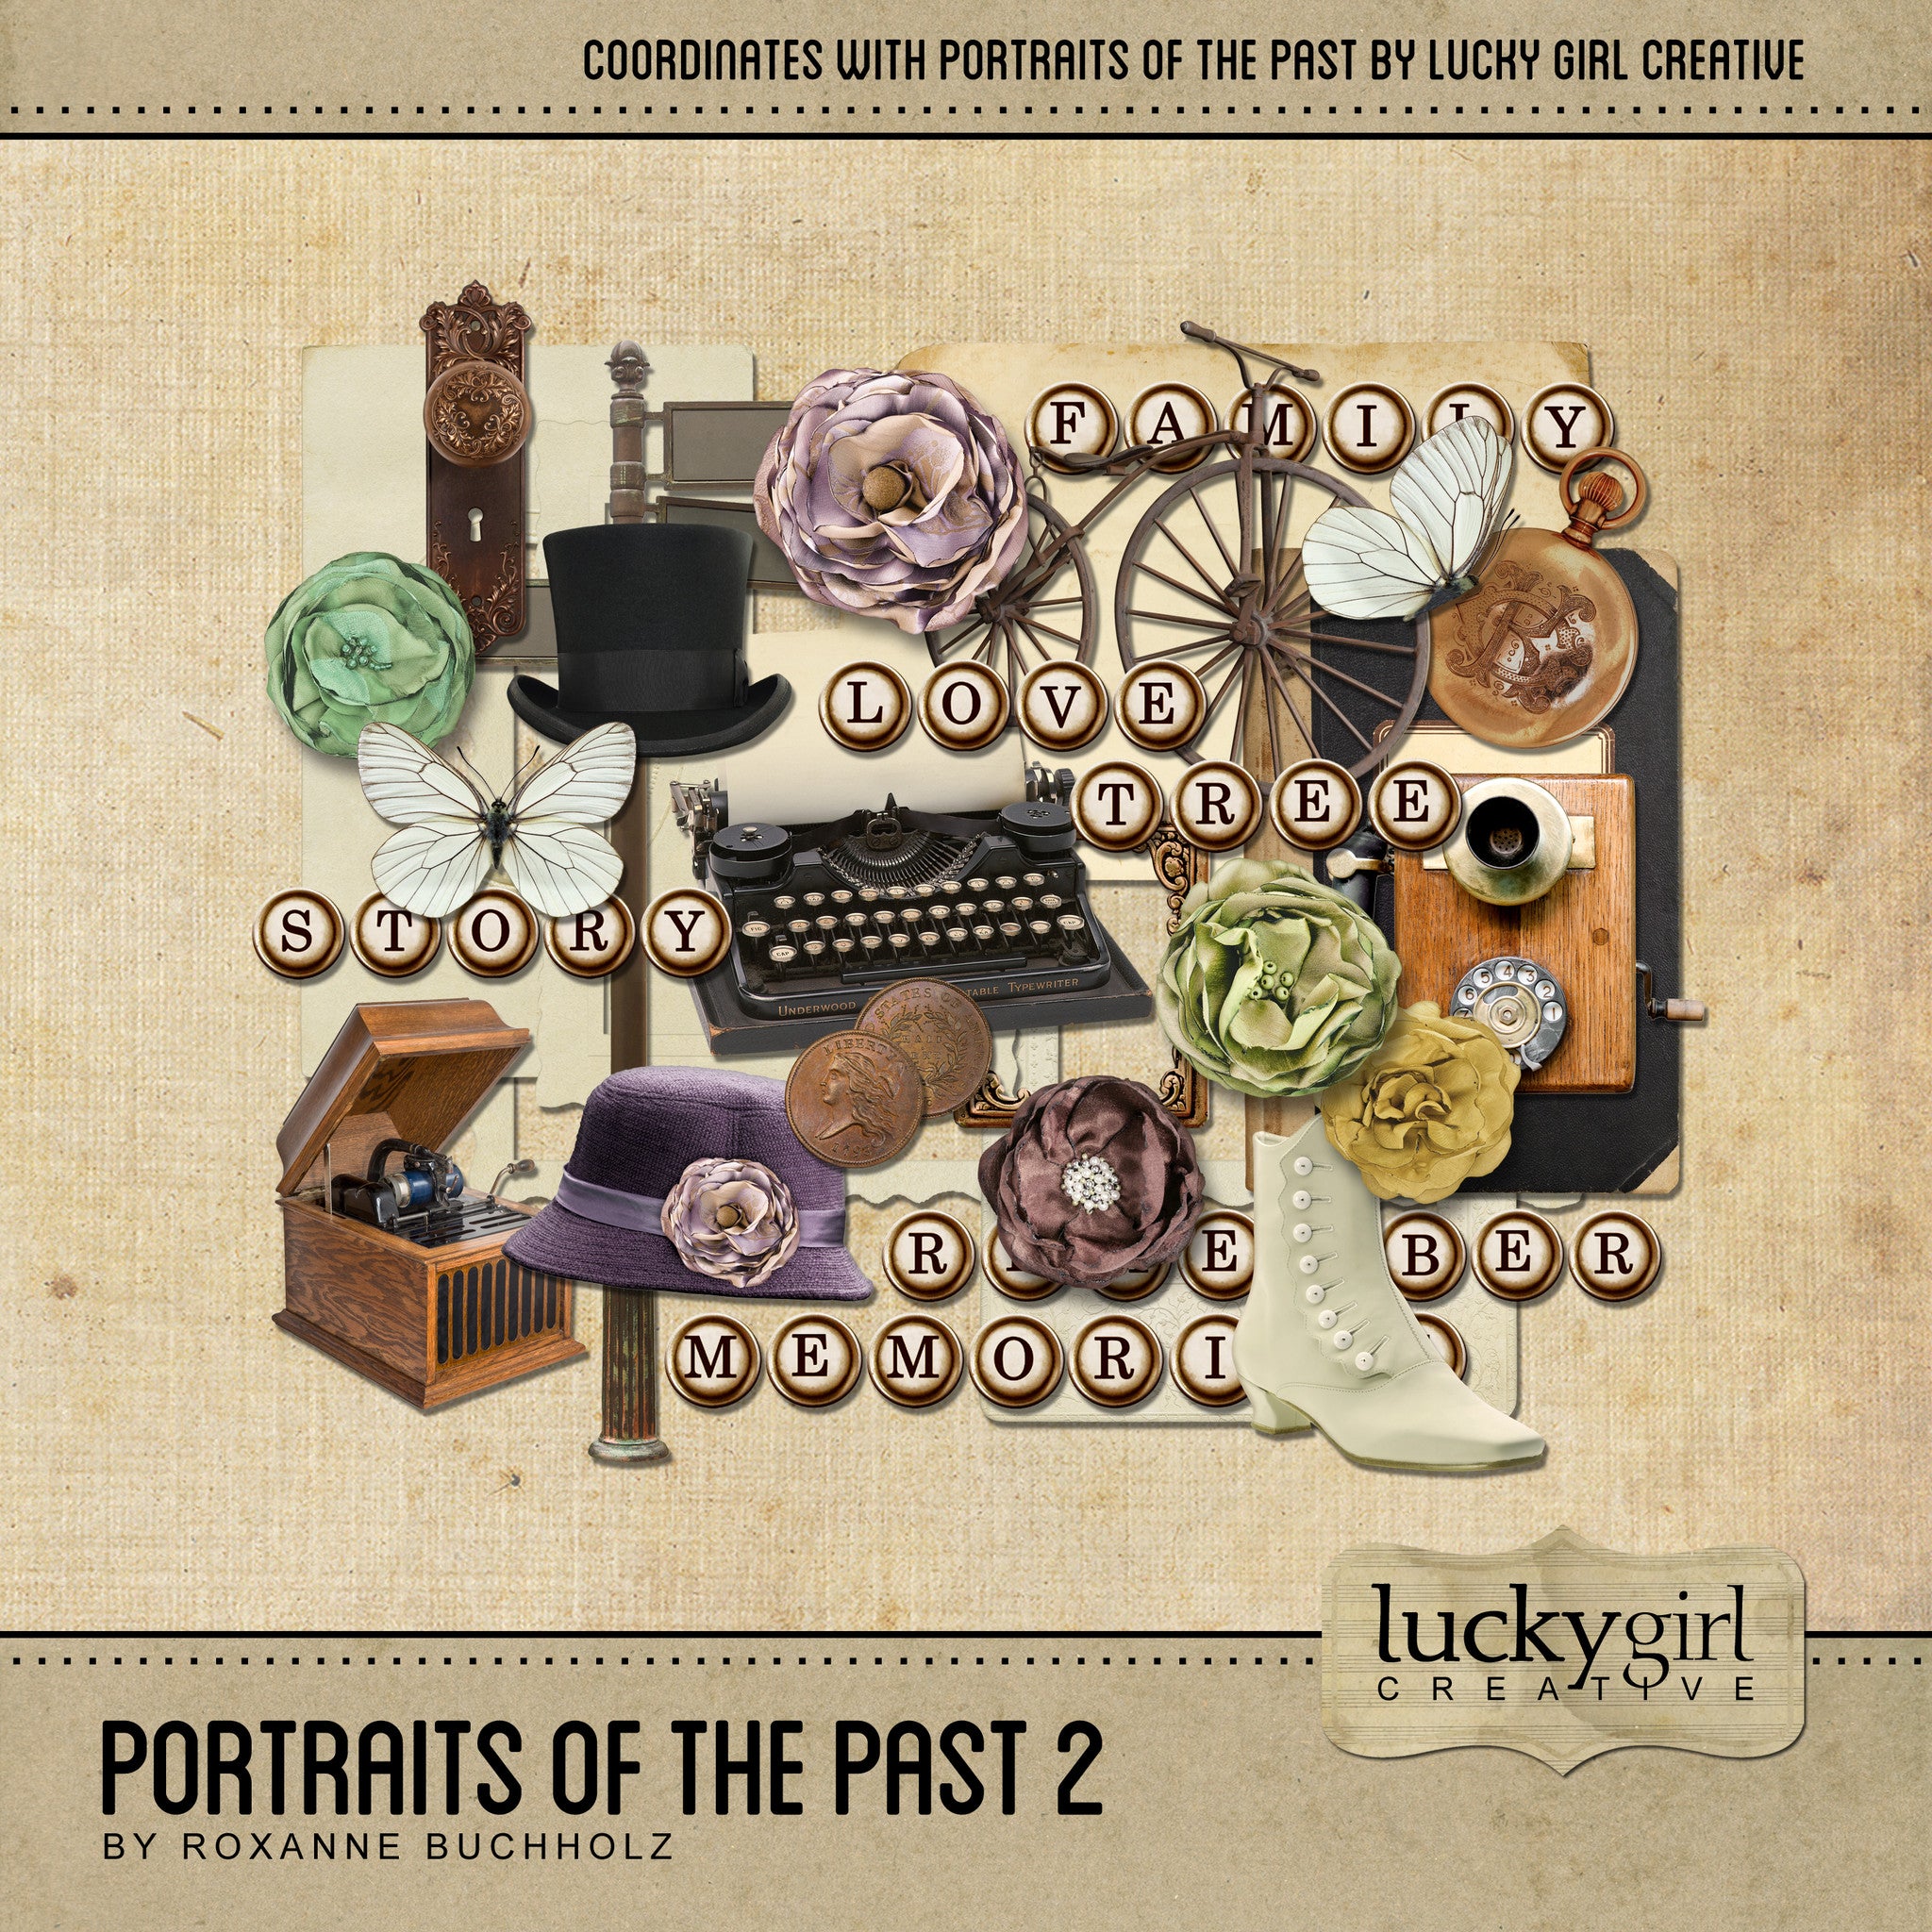 Portraits of the Past 2 Digital Scrapbook Kit is the vintage collection to look to for life stories, family history, genealogy, and any project with a historical style or subject matter. While the digital art elements have a decidedly antique look from the 1920's - 1940's, the word art will be at home on any project featuring family. Typewriter key words include love, family, tree, memories, remember, and story.